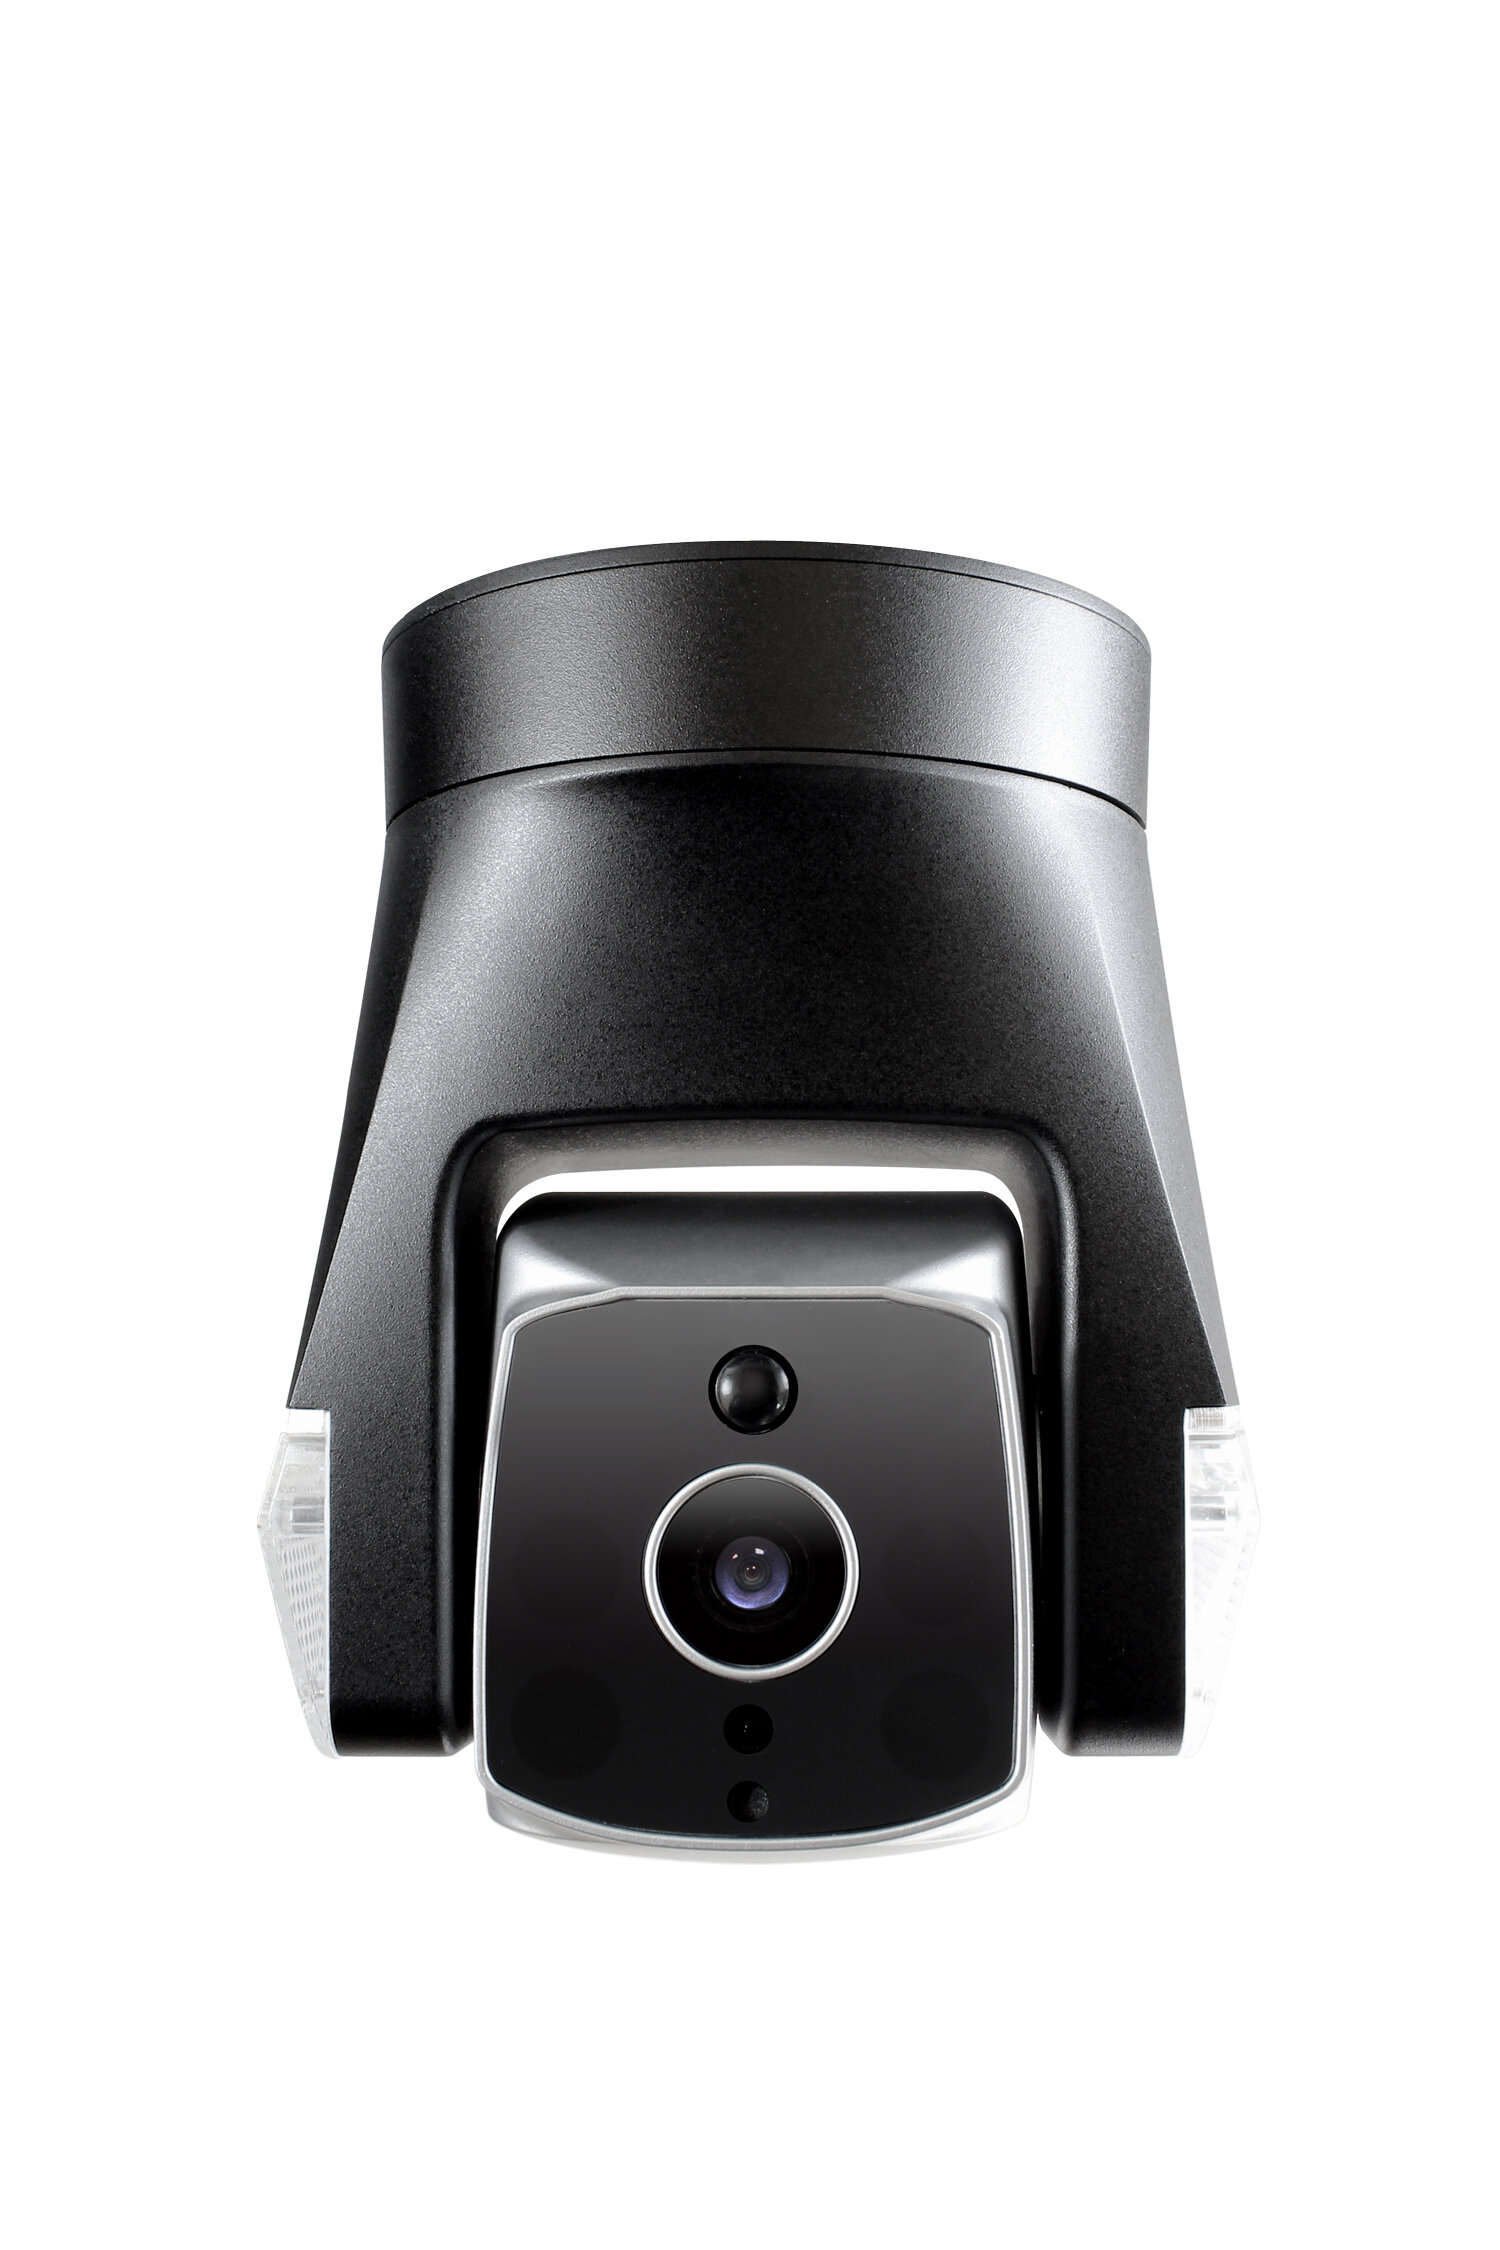 4b - Ares outdoor camera by Amaryllo.jpg